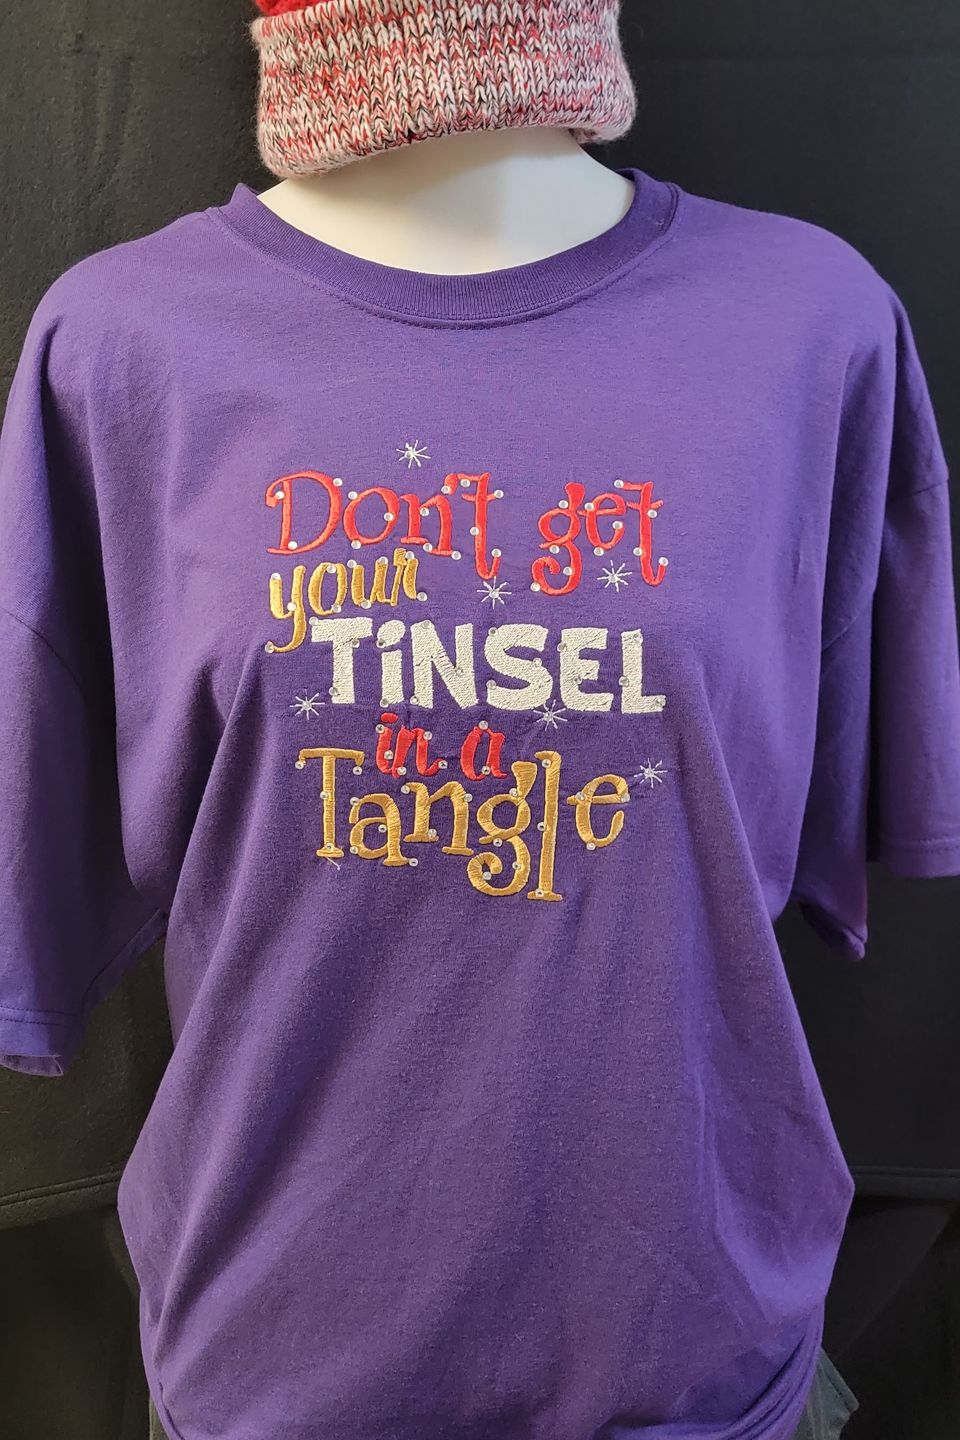 "DTF Direct-to-Film" example purple Christmas T-shirt 